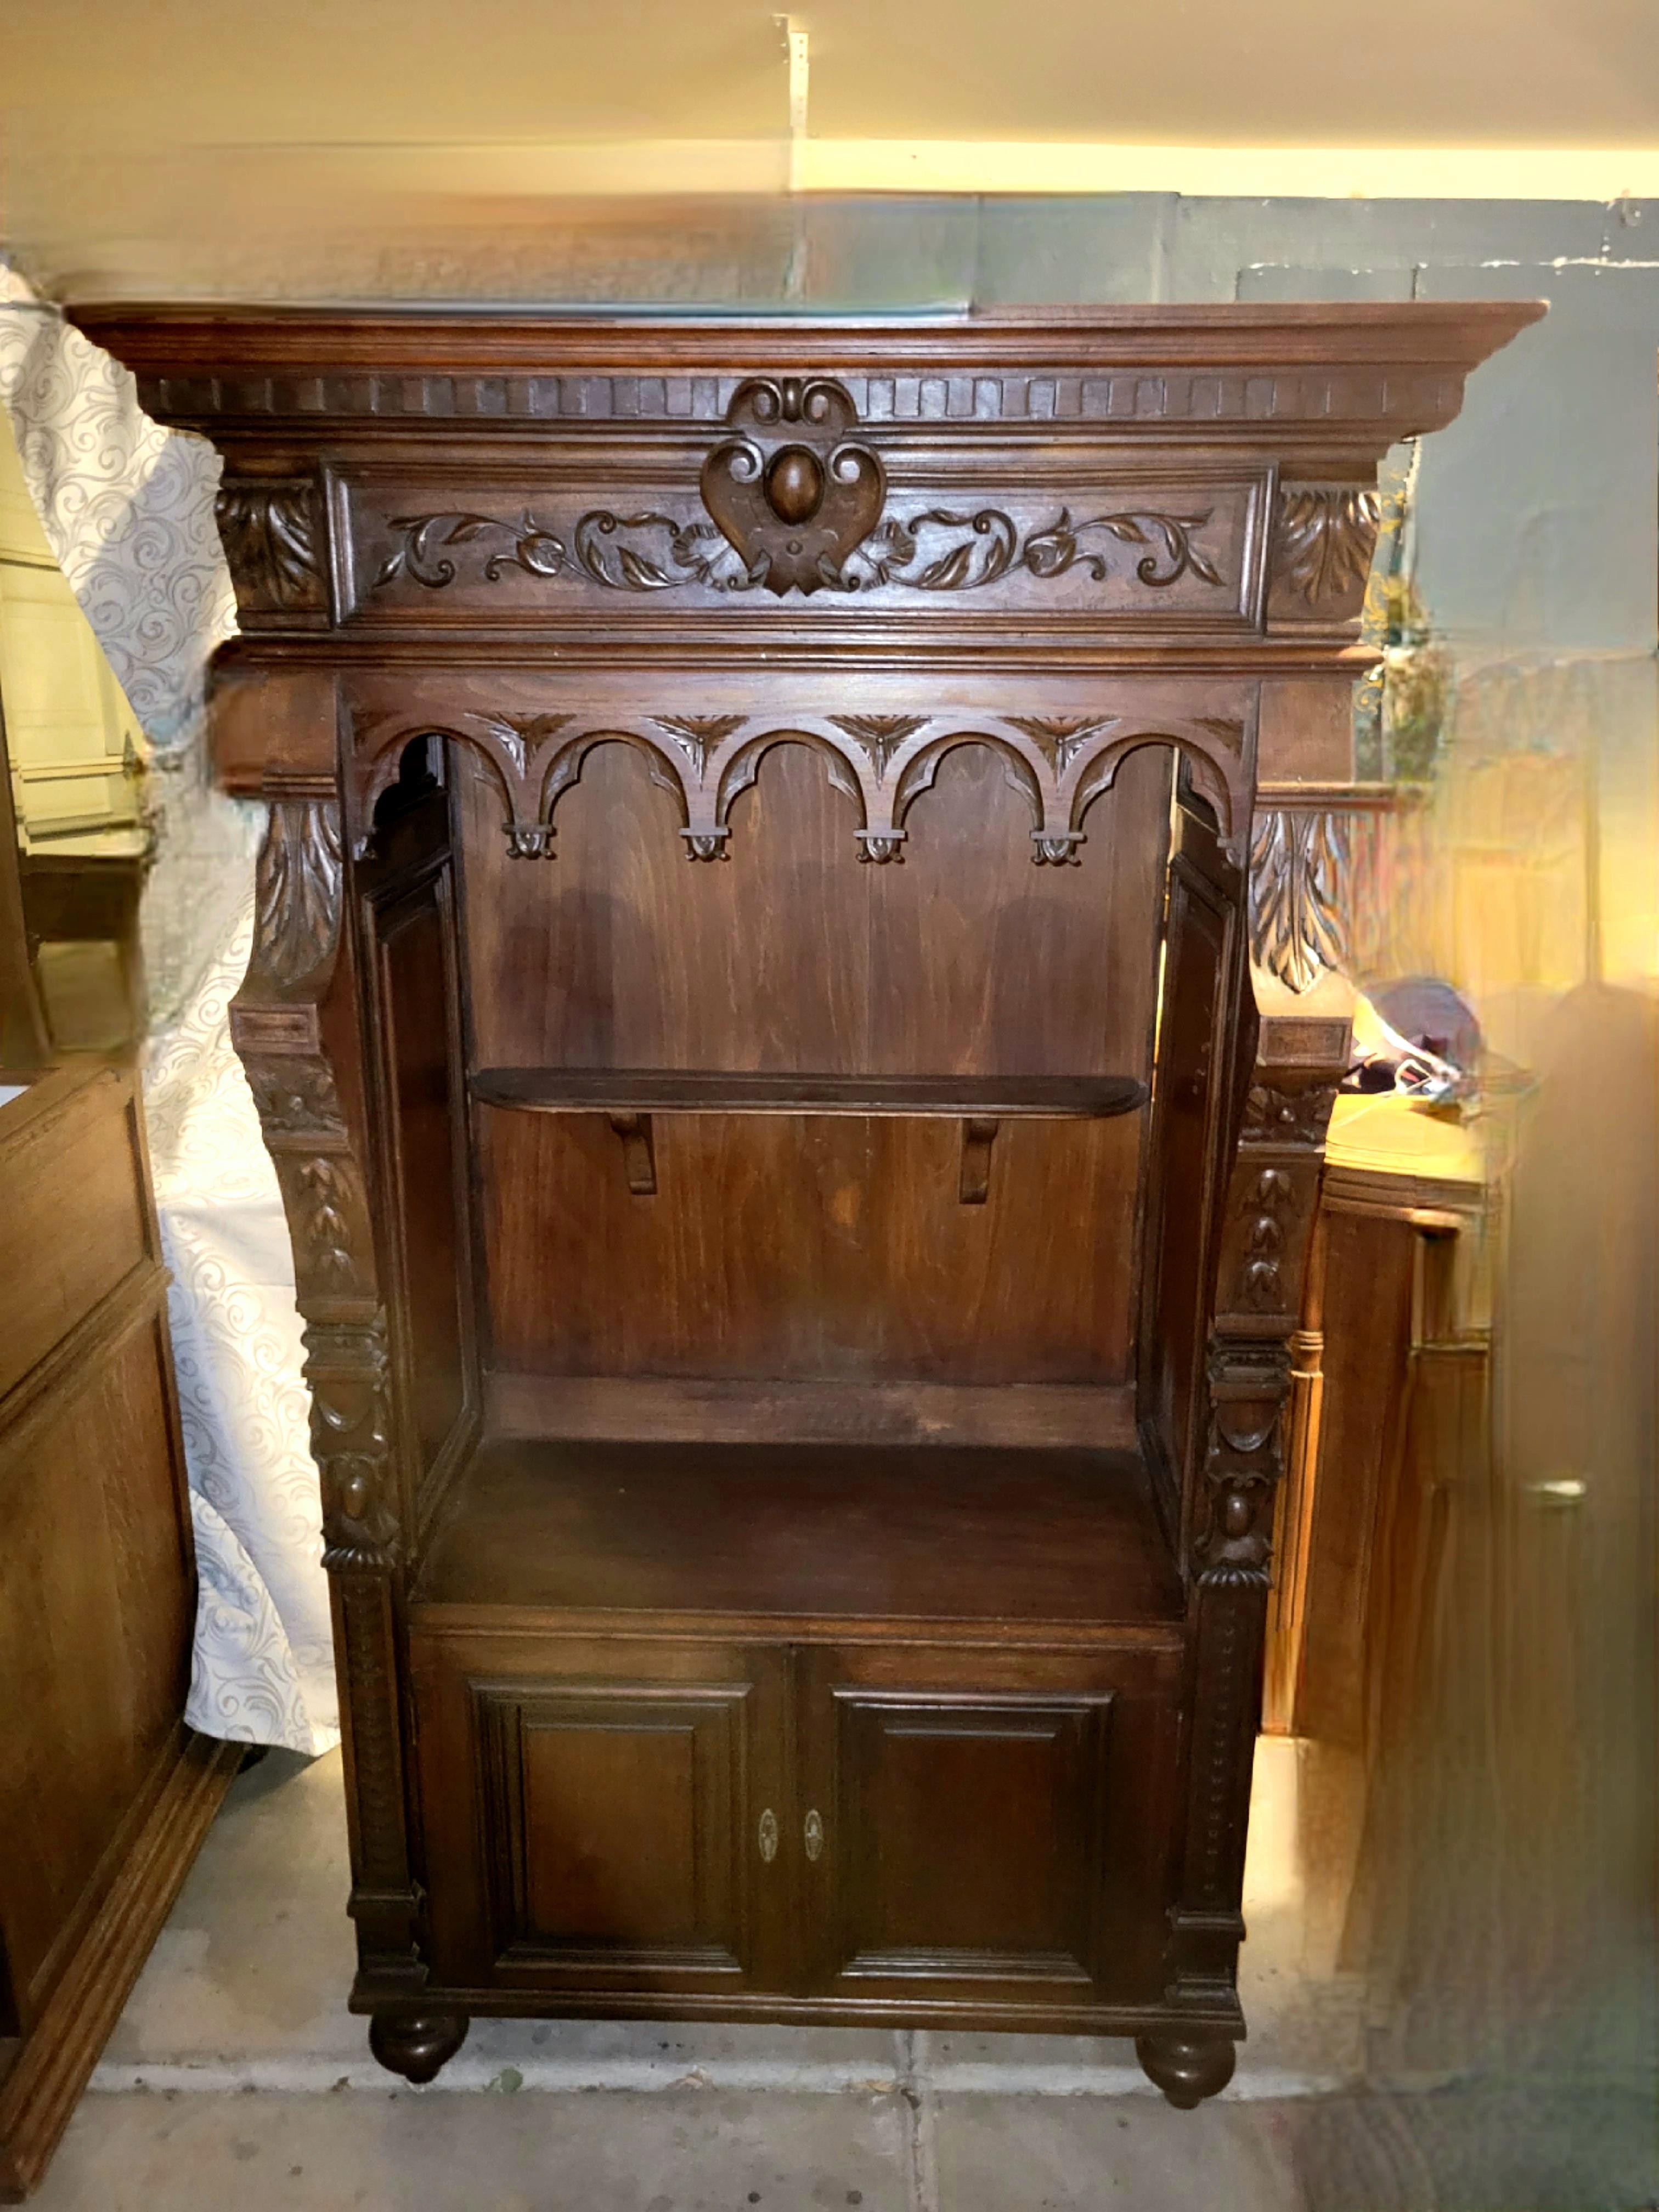 Antique hand-carved buffet, plate display, cupboard - 63 x 32 x 16 1/2.  This piece is study and well preserved. 
The buffet has a  25 inch long by 4.5 inch wide horizontal shelf with rounded corners, supported by two corbels. 
A bottom compartment